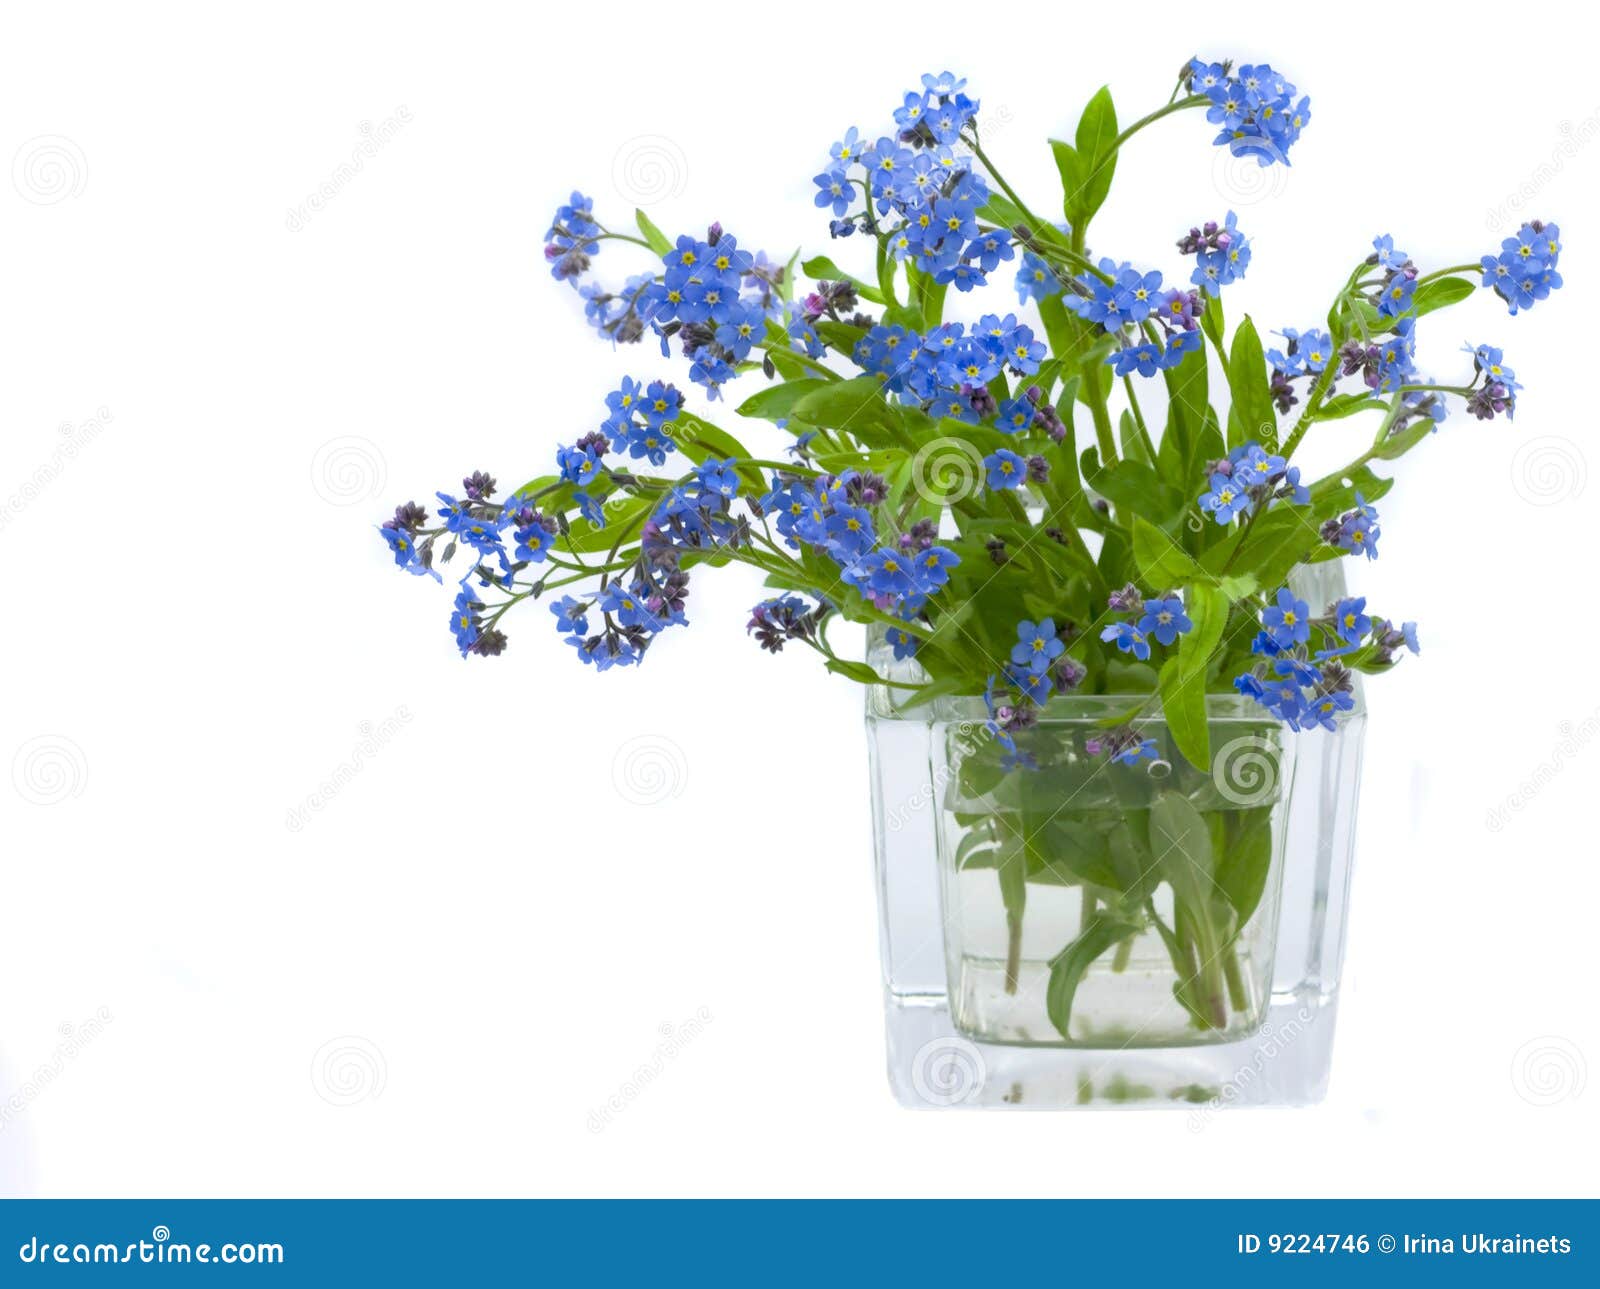 free clip art forget me not flowers - photo #44